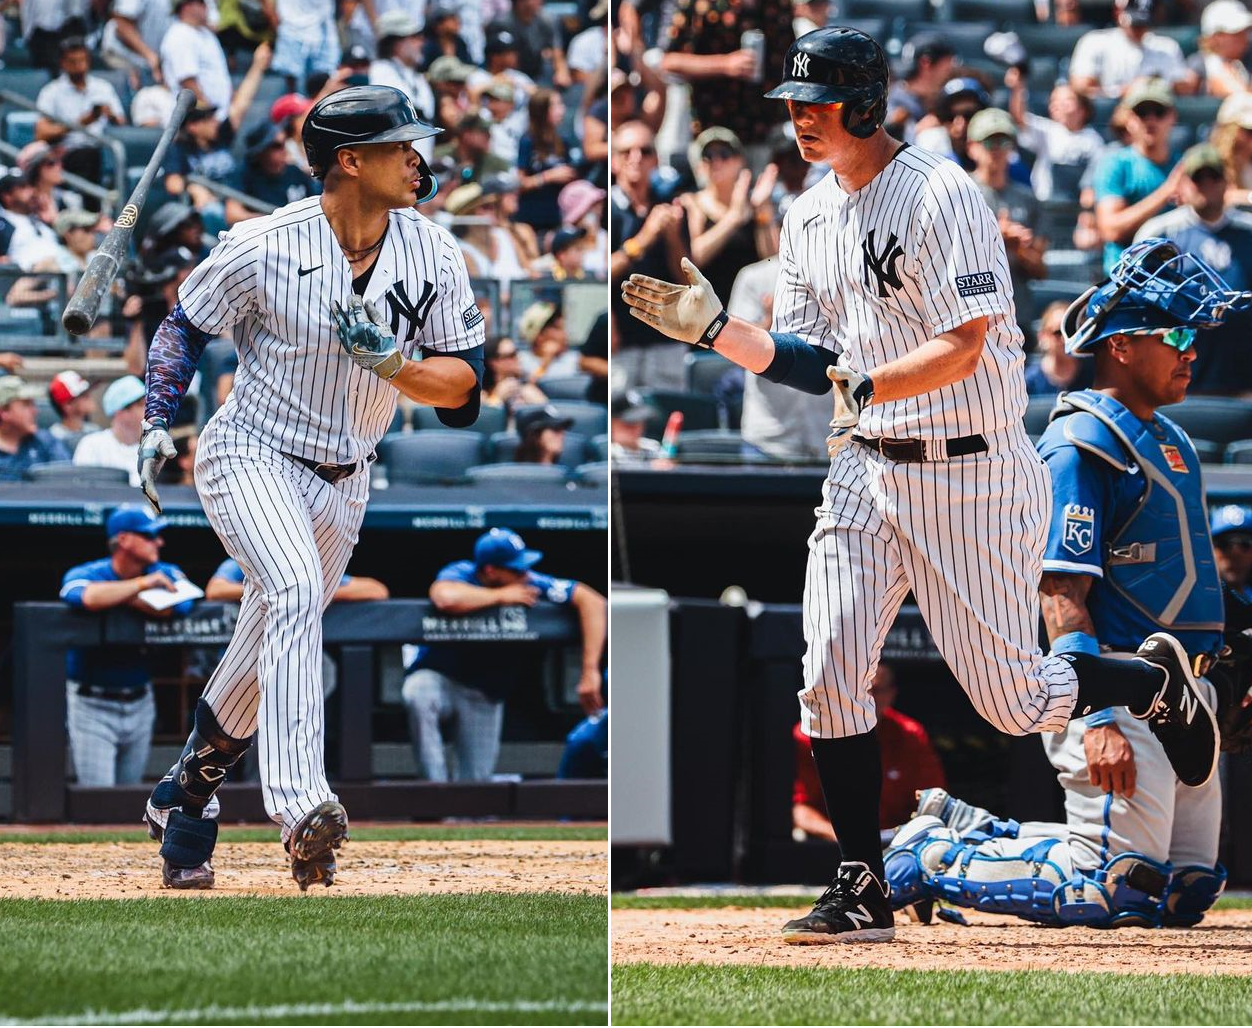 Giancarlo Stanton steps up in a big way in crucial Yankees win